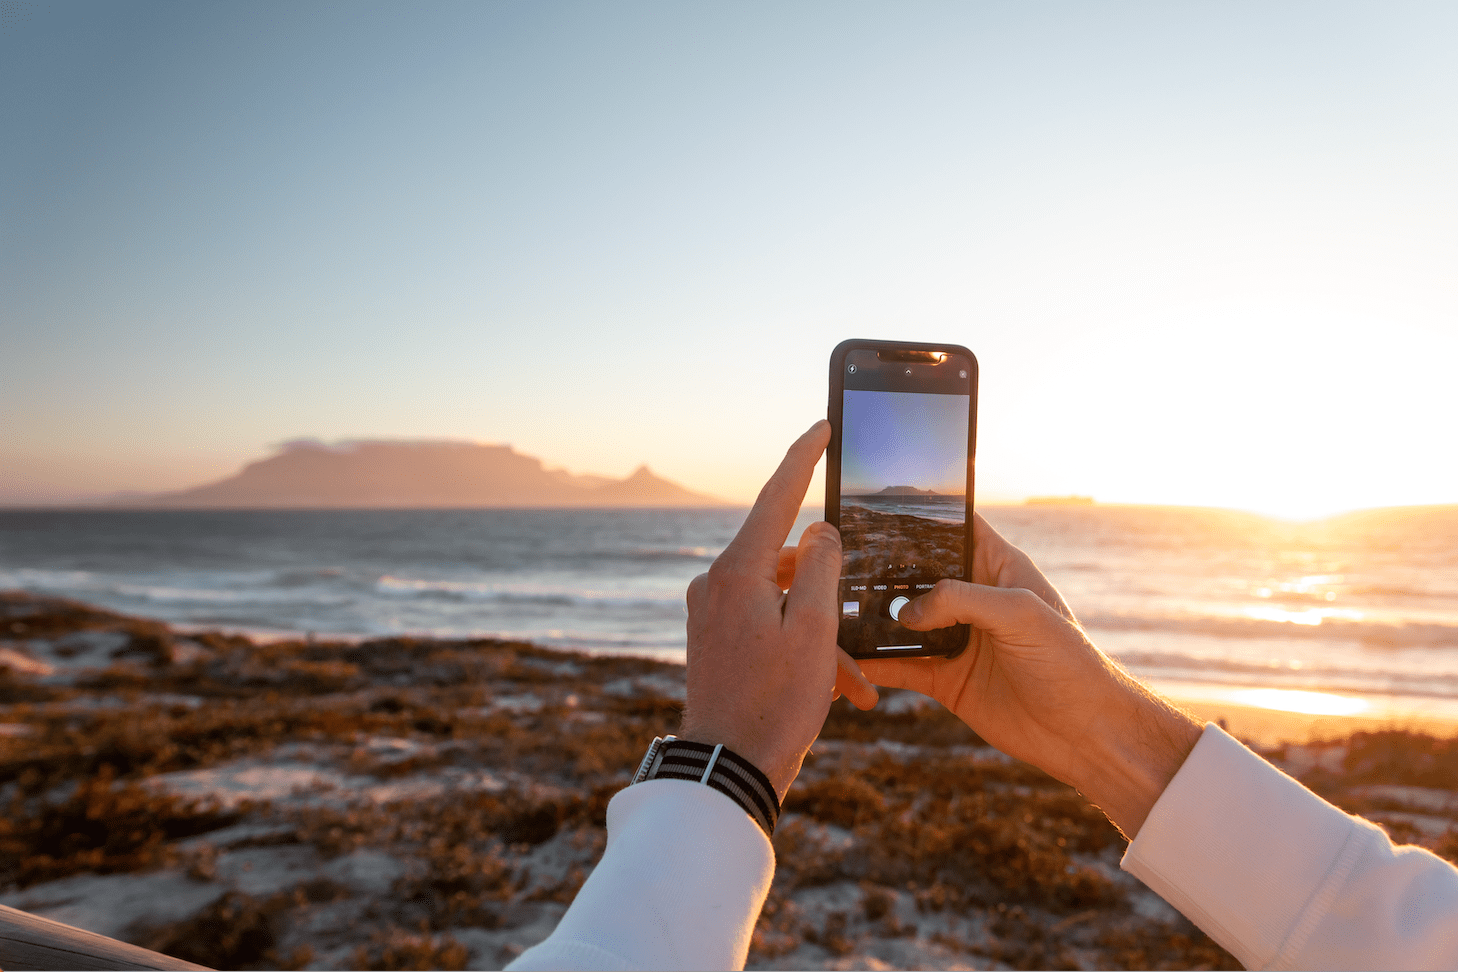 You don't need an amazing camera to take stunning beach photos, learn how to use your phone camera with these quick tips